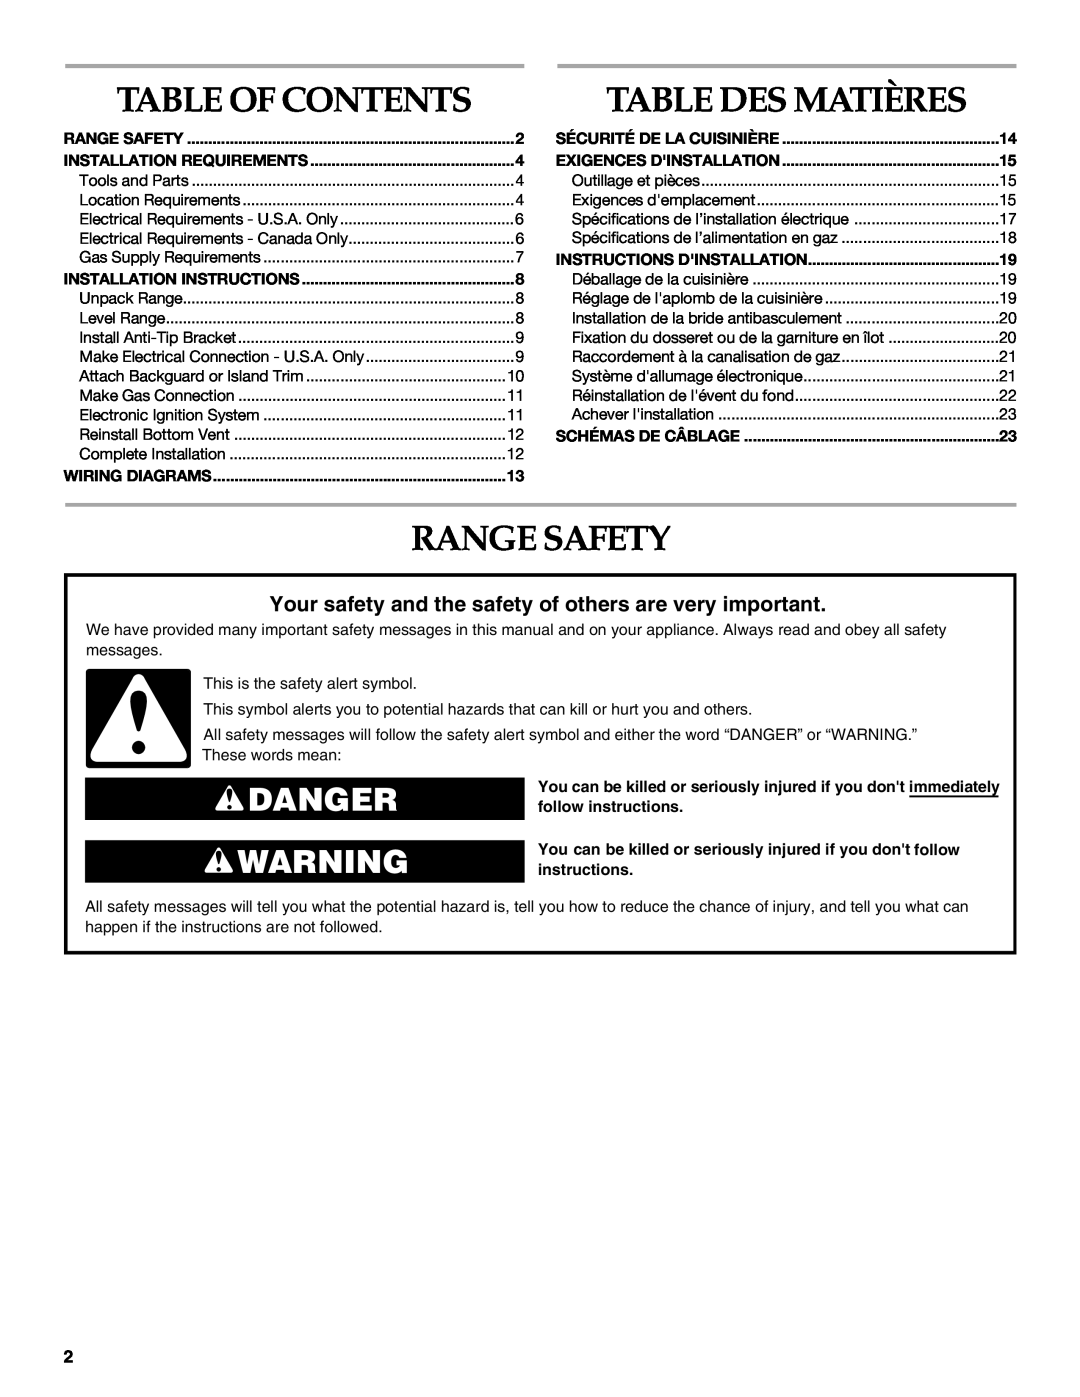 KitchenAid 9759536B Table Des Matières, Range Safety, Danger, Table Of Contents, Installation Requirements 